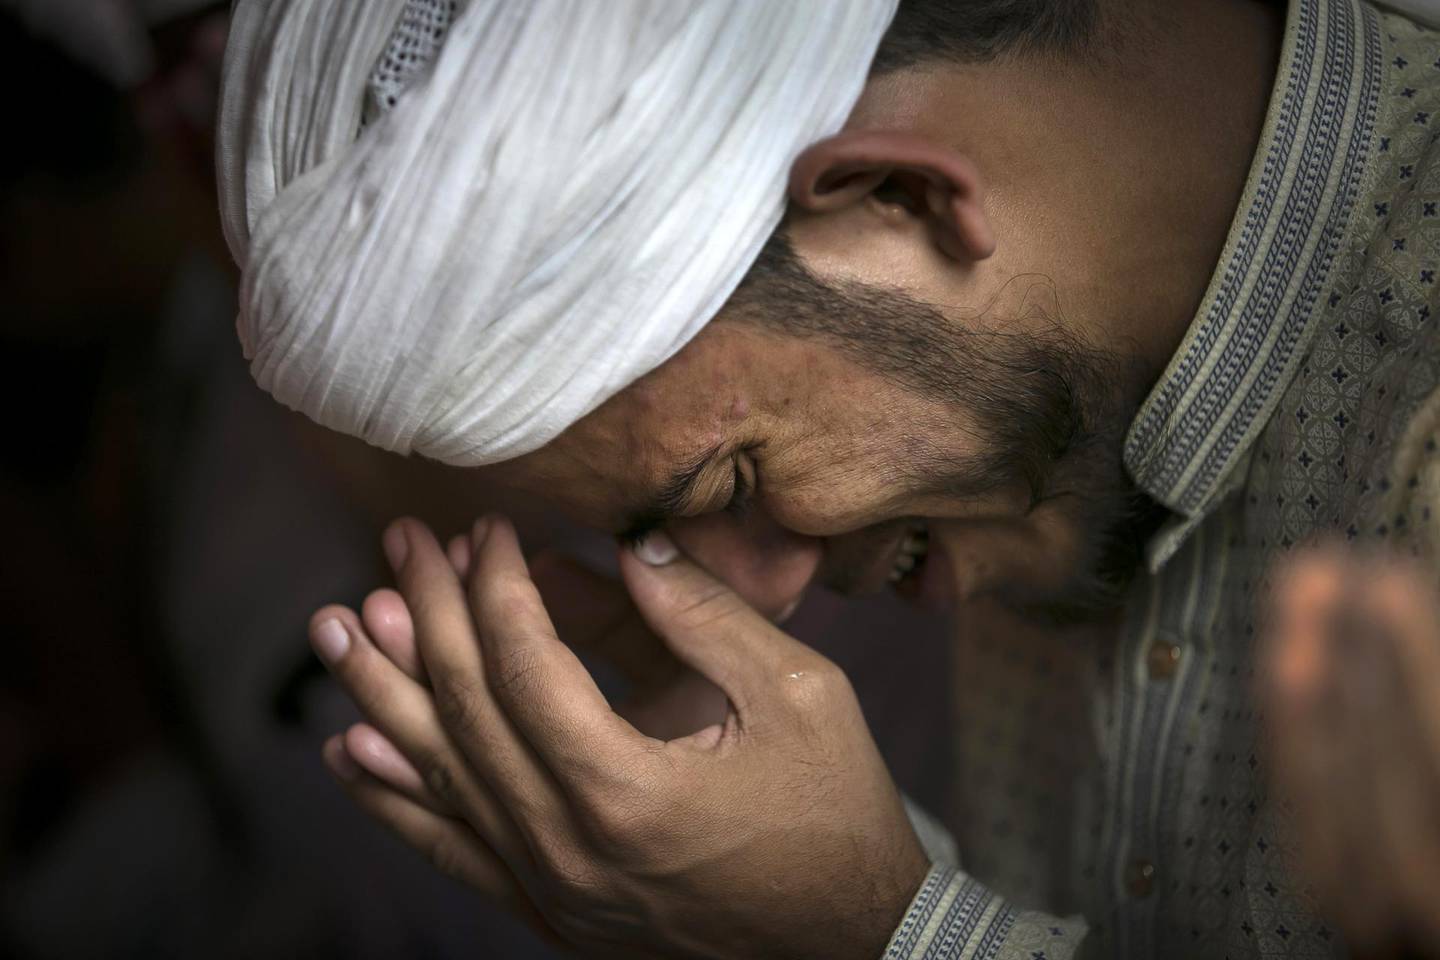 COX'S BAZAR, BANGLADESH - JANUARY 23: A man cries during a special prayer for a good outcome at the ICJ hearing at a mosque in a Rohingya refugee camp on January 23, 2020 in Cox's Bazar, Bangladesh. On Thursday, the International Court of Justice ordered Myanmar to take emergency measures to prevent genocide of the Rohingya. In a unanimously-ruled order  the court upheld the provisions of the 1948 Genocide Convention - saying Myanmar had "caused irreparable damage to the rights of the Rohingya". (Photo by Allison Joyce/Getty Images)